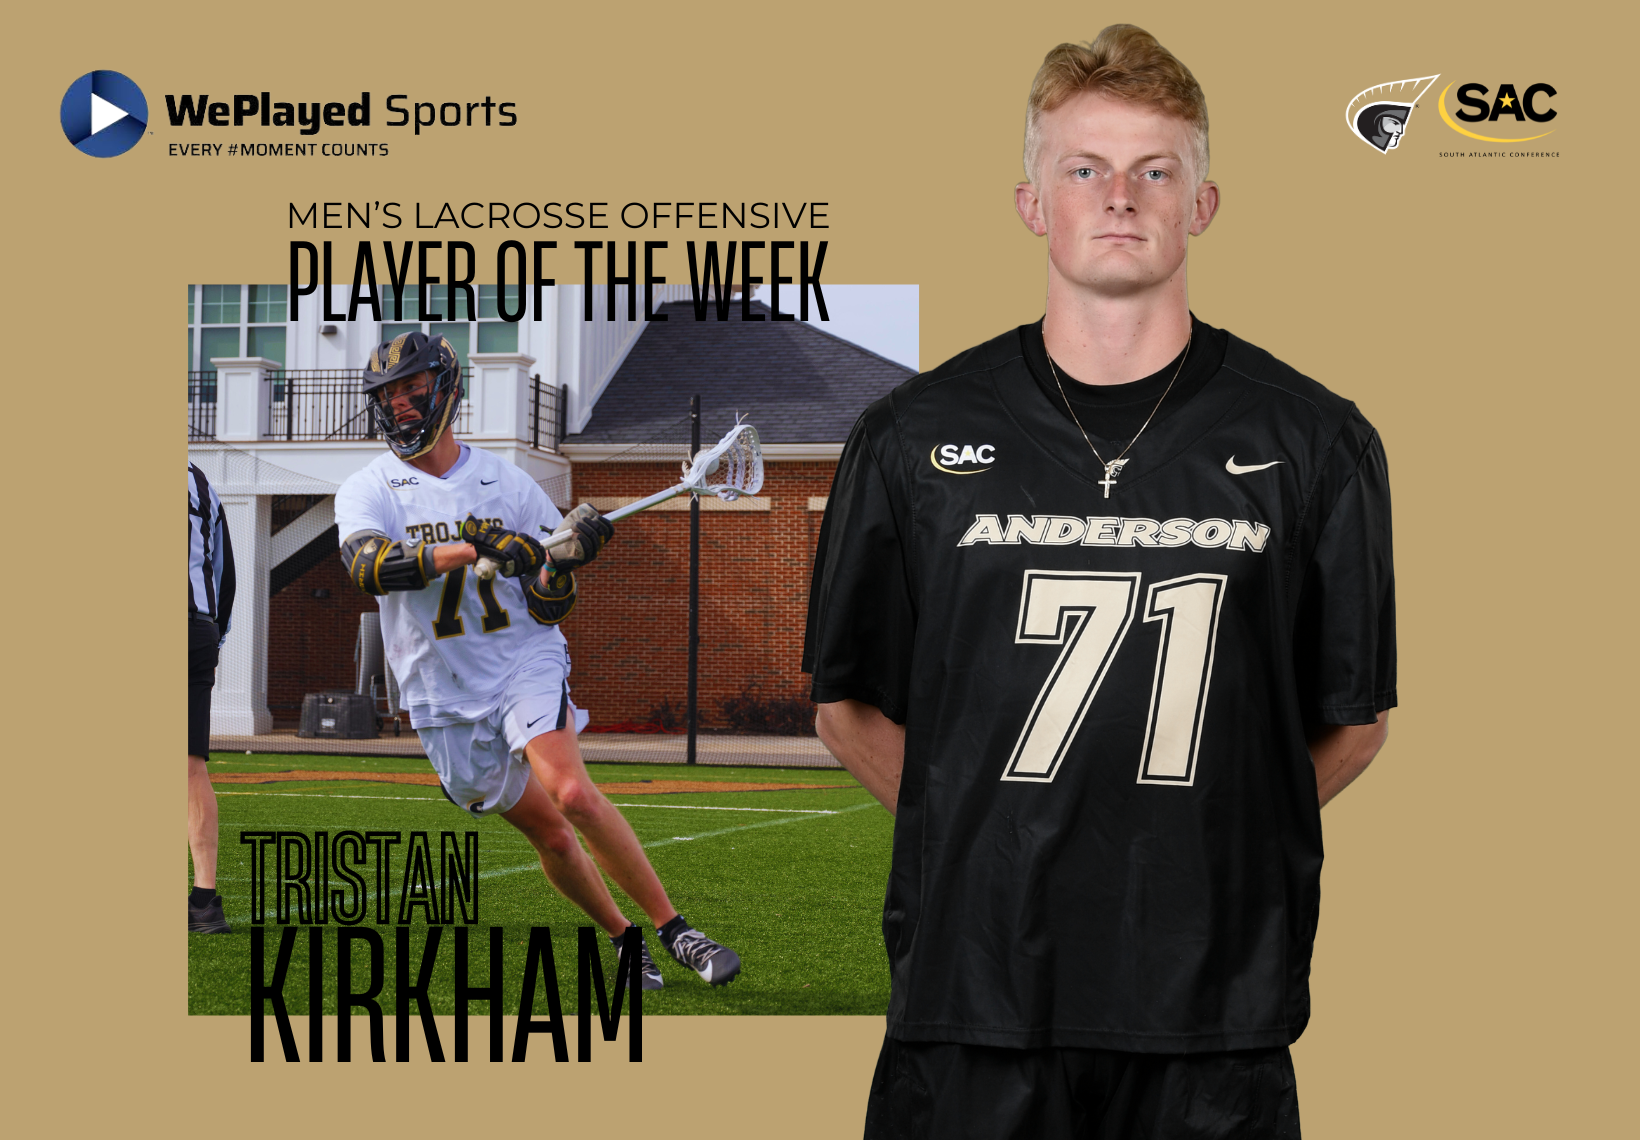 Kirkham Named WePlayed Sports Men's Lacrosse Offensive Player of the Week